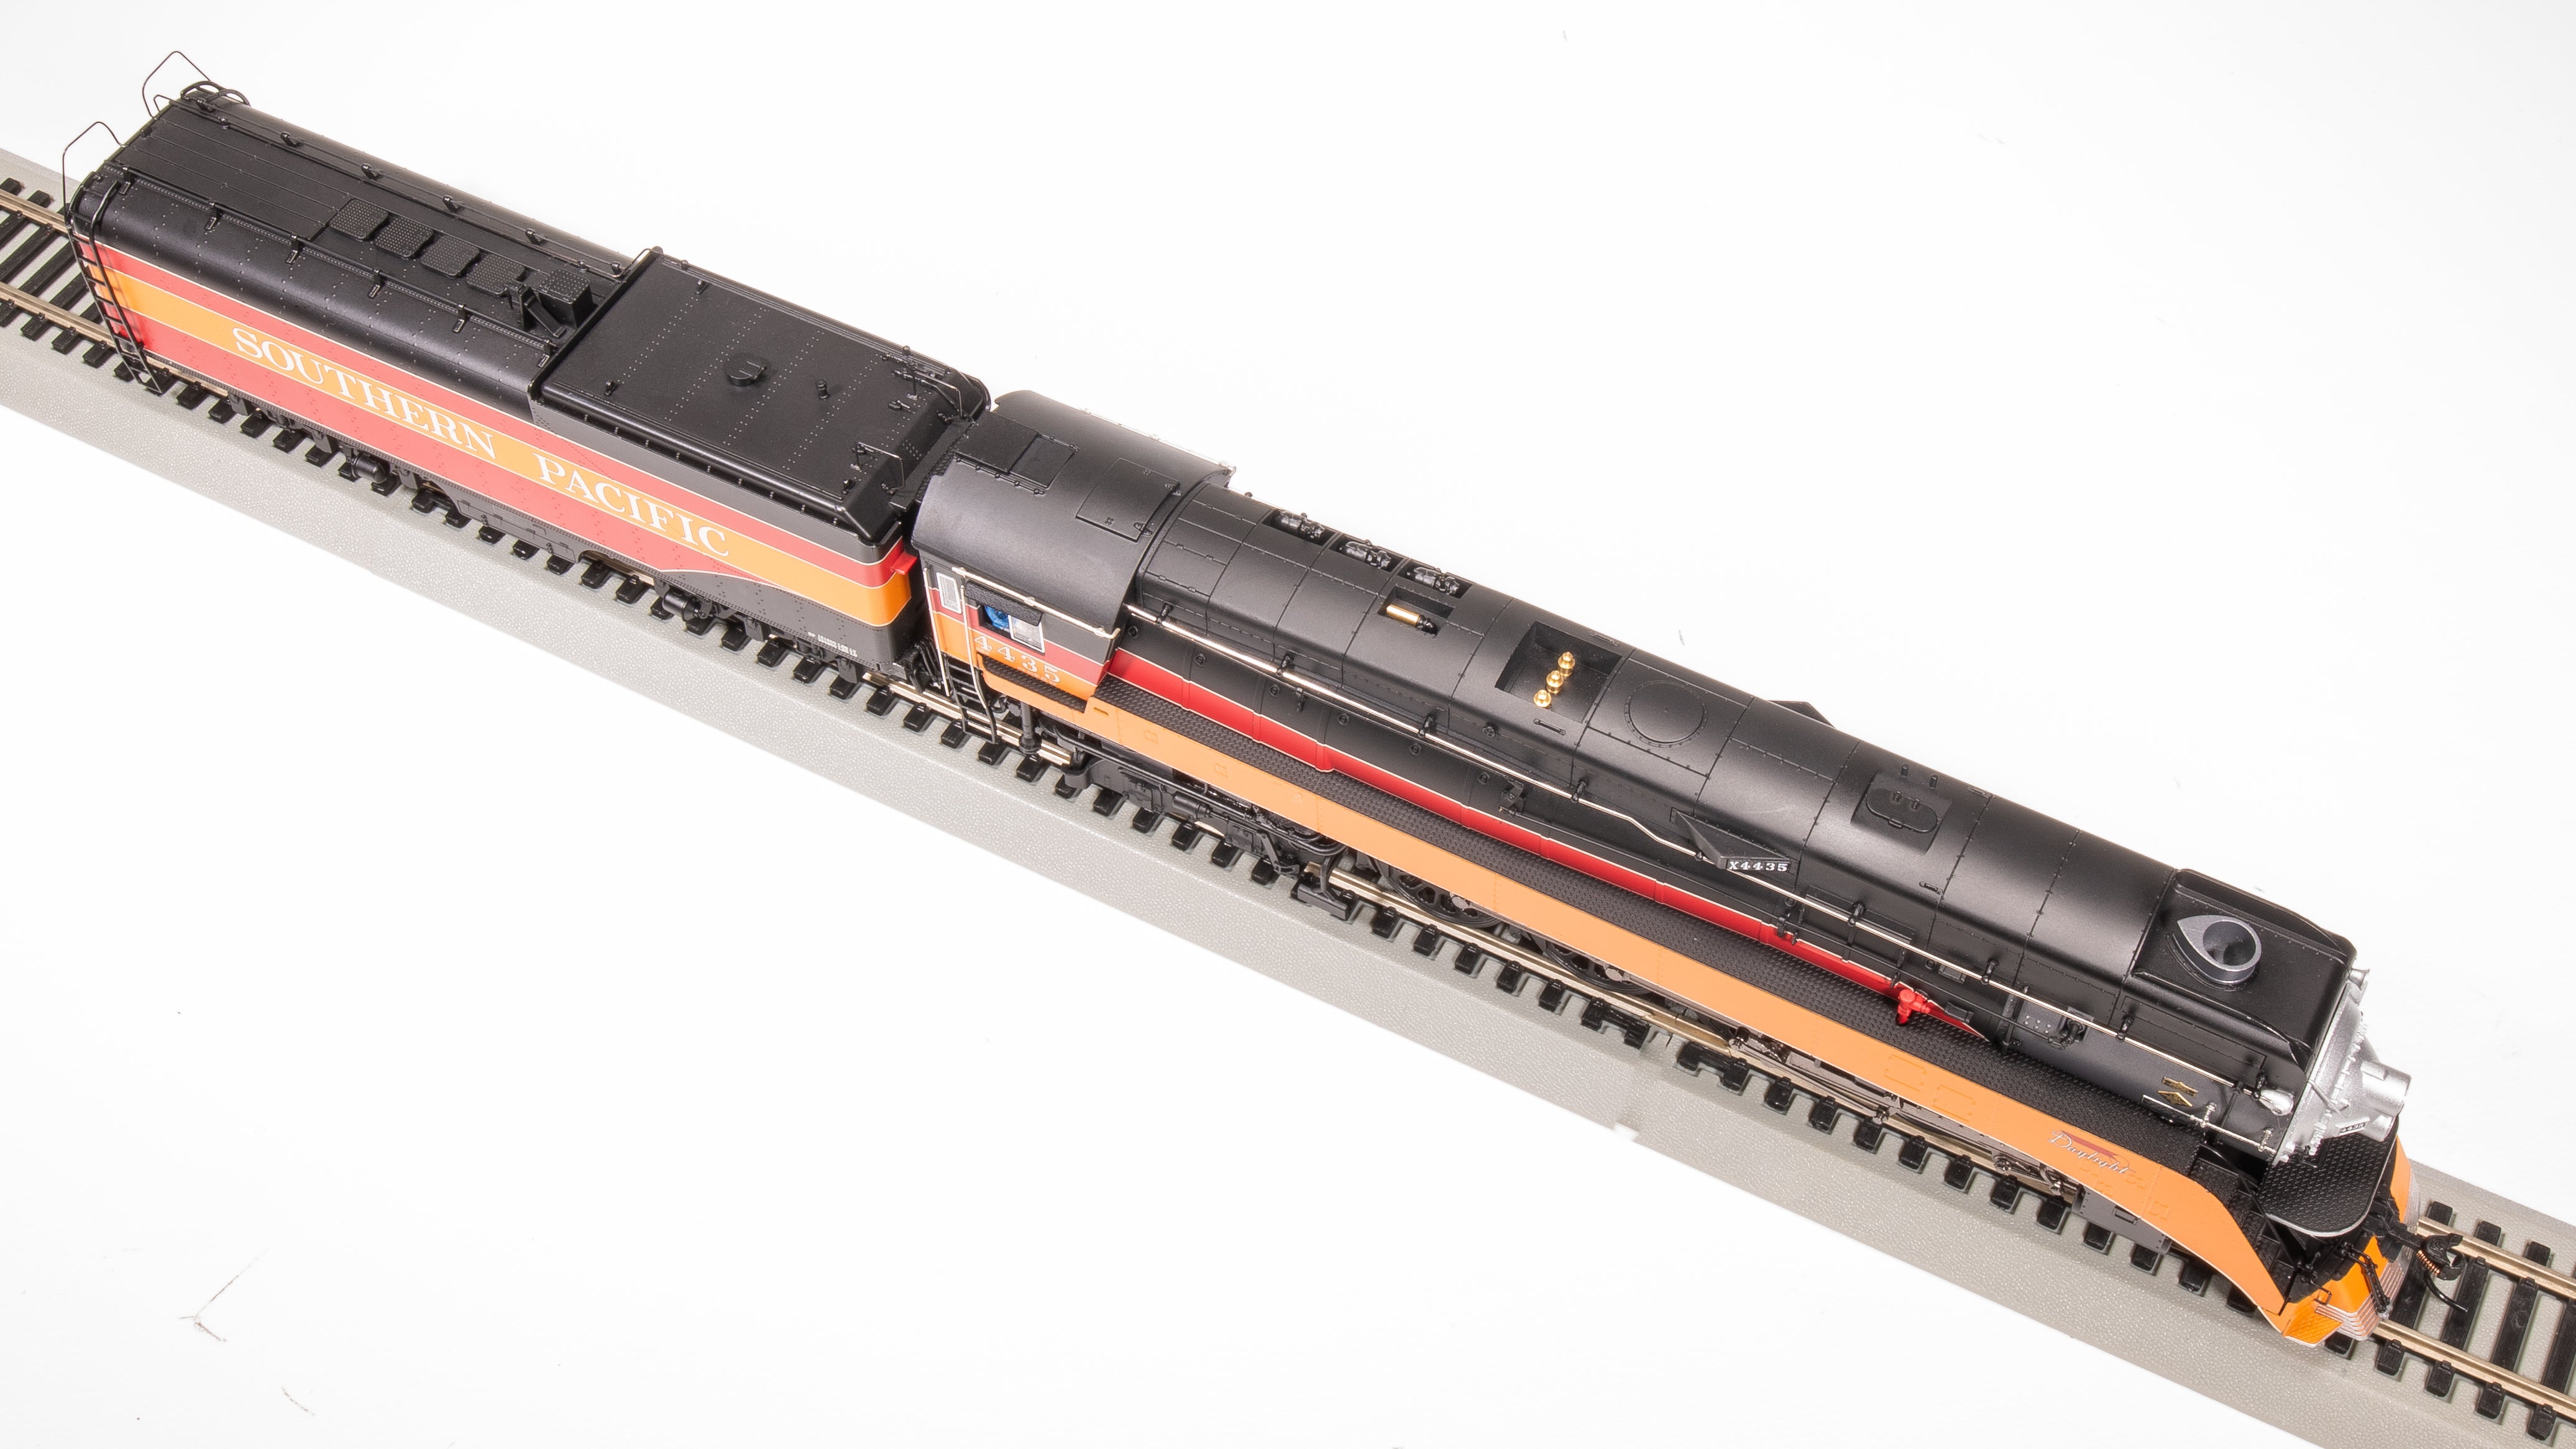 7616 Southern Pacific GS-4, #4435, In-Service, Post-War, Daylight Paint, Paragon4 Sound/DC/DCC, Smoke, HO